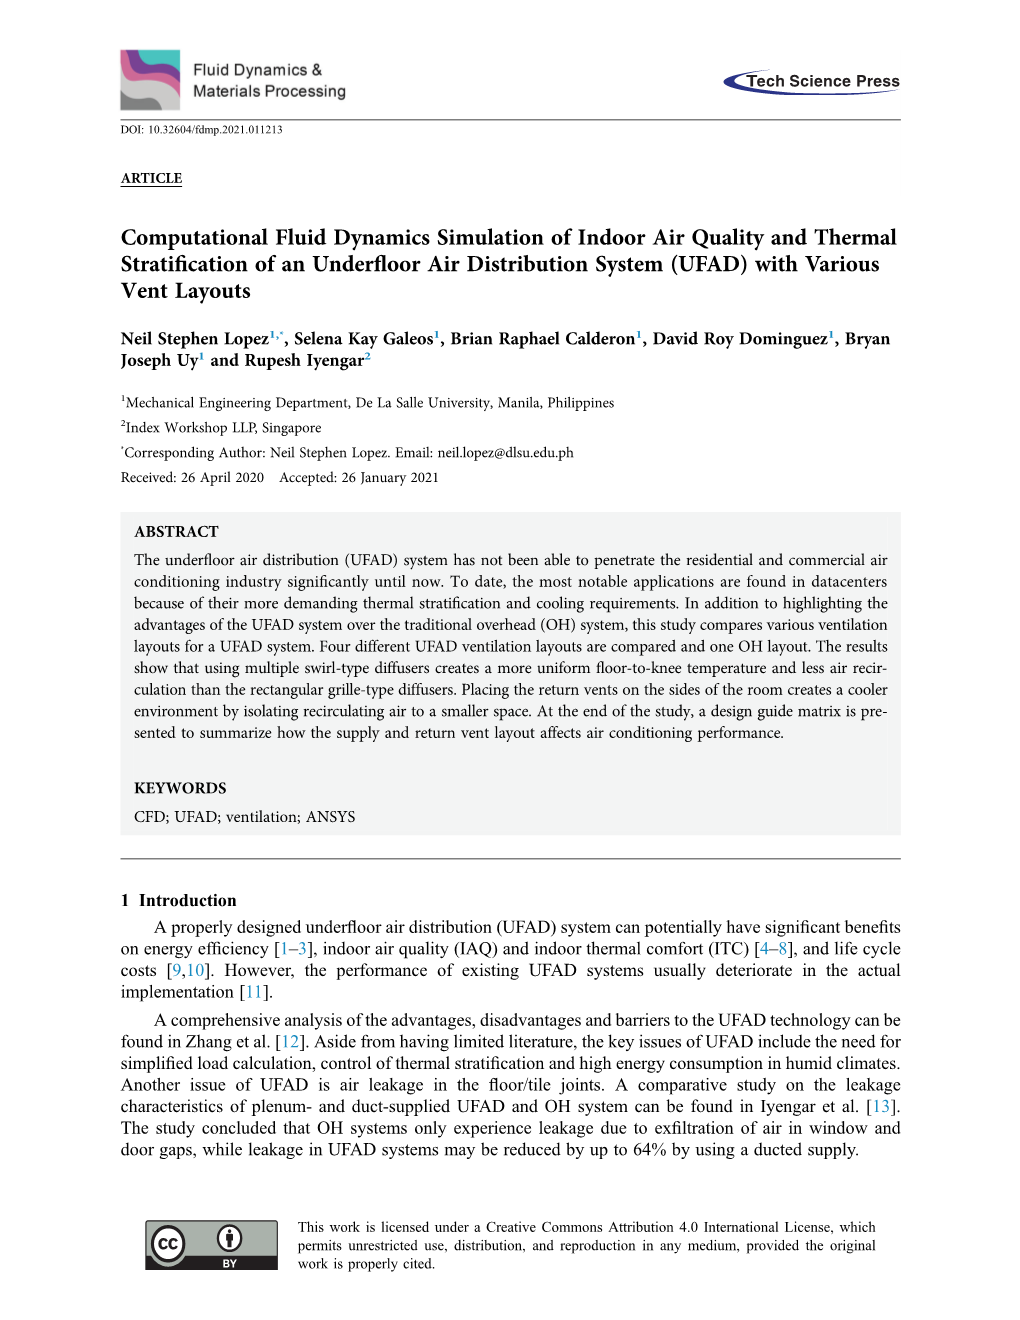 Computational Fluid Dynamics Simulation of Indoor Air Quality and Thermal Stratiﬁcation of an Underﬂoor Air Distribution System (UFAD) with Various Vent Layouts